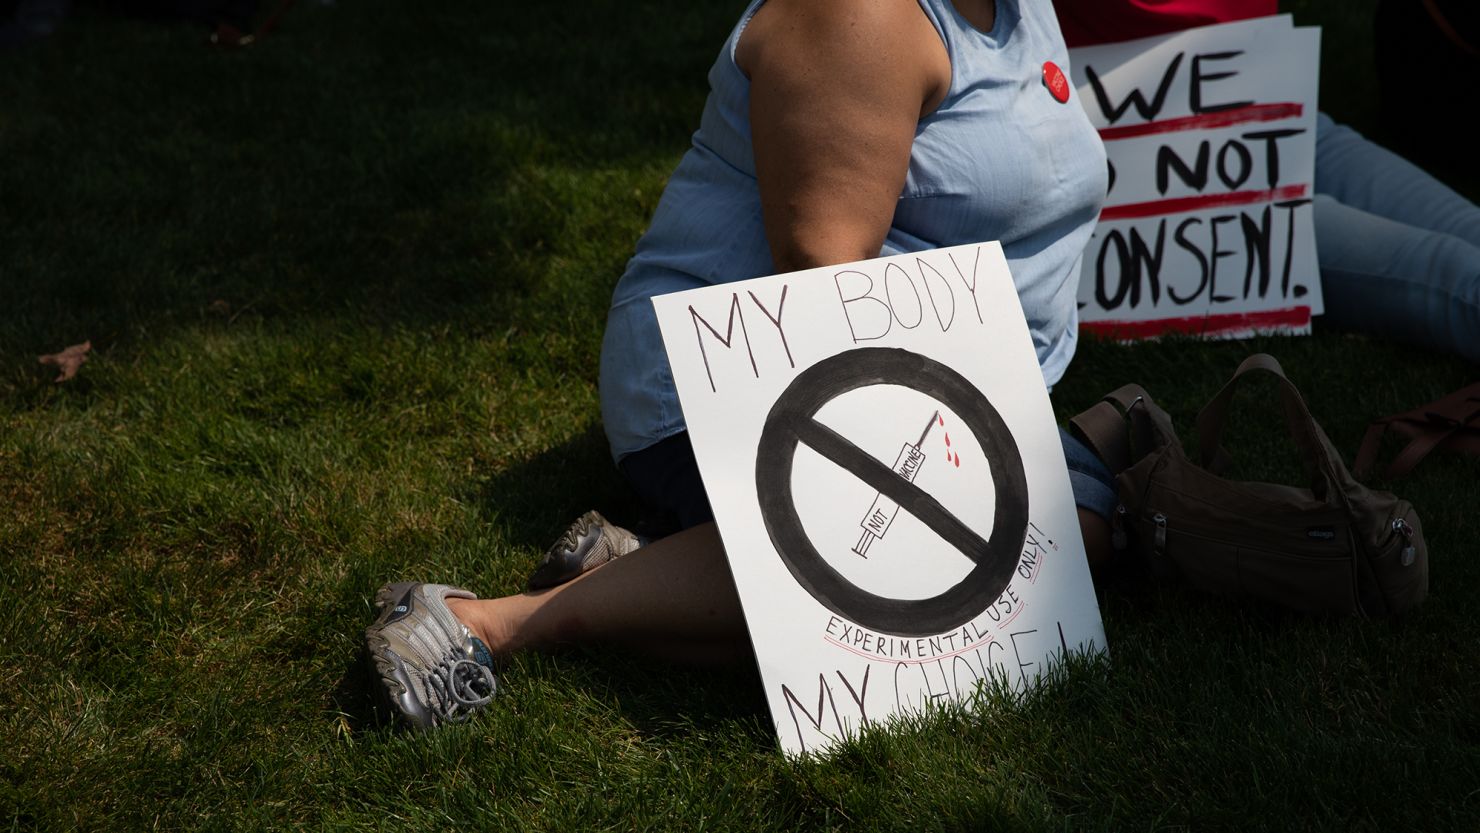 Demonstrators gather to protest mandated vaccines outside of the Michigan State Capitol on August 6, 2021, in Lansing, Michigan.